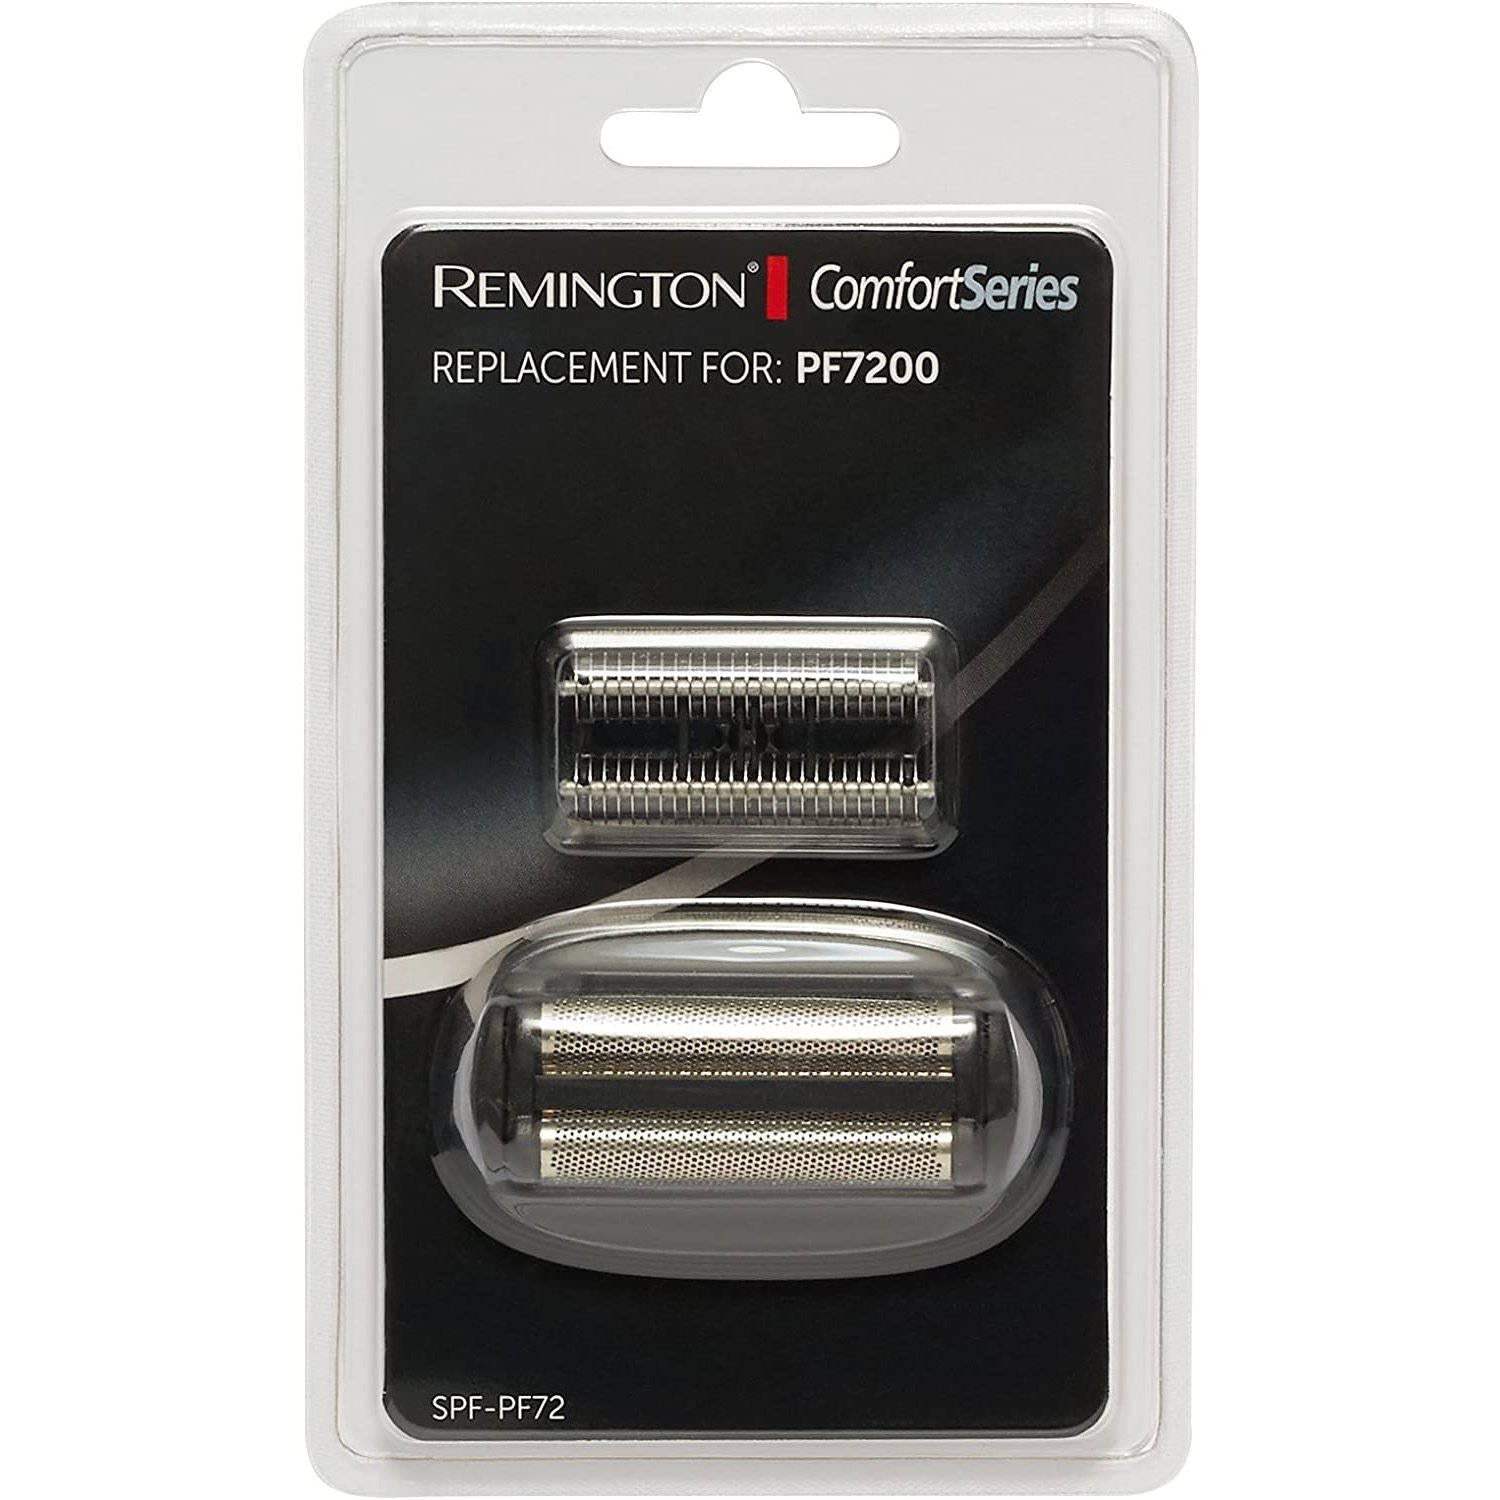 Remington SPF-PF72 Replacement Foil and Cutter Set - Fits PF7200 Electric Shaver - Healthxpress.ie